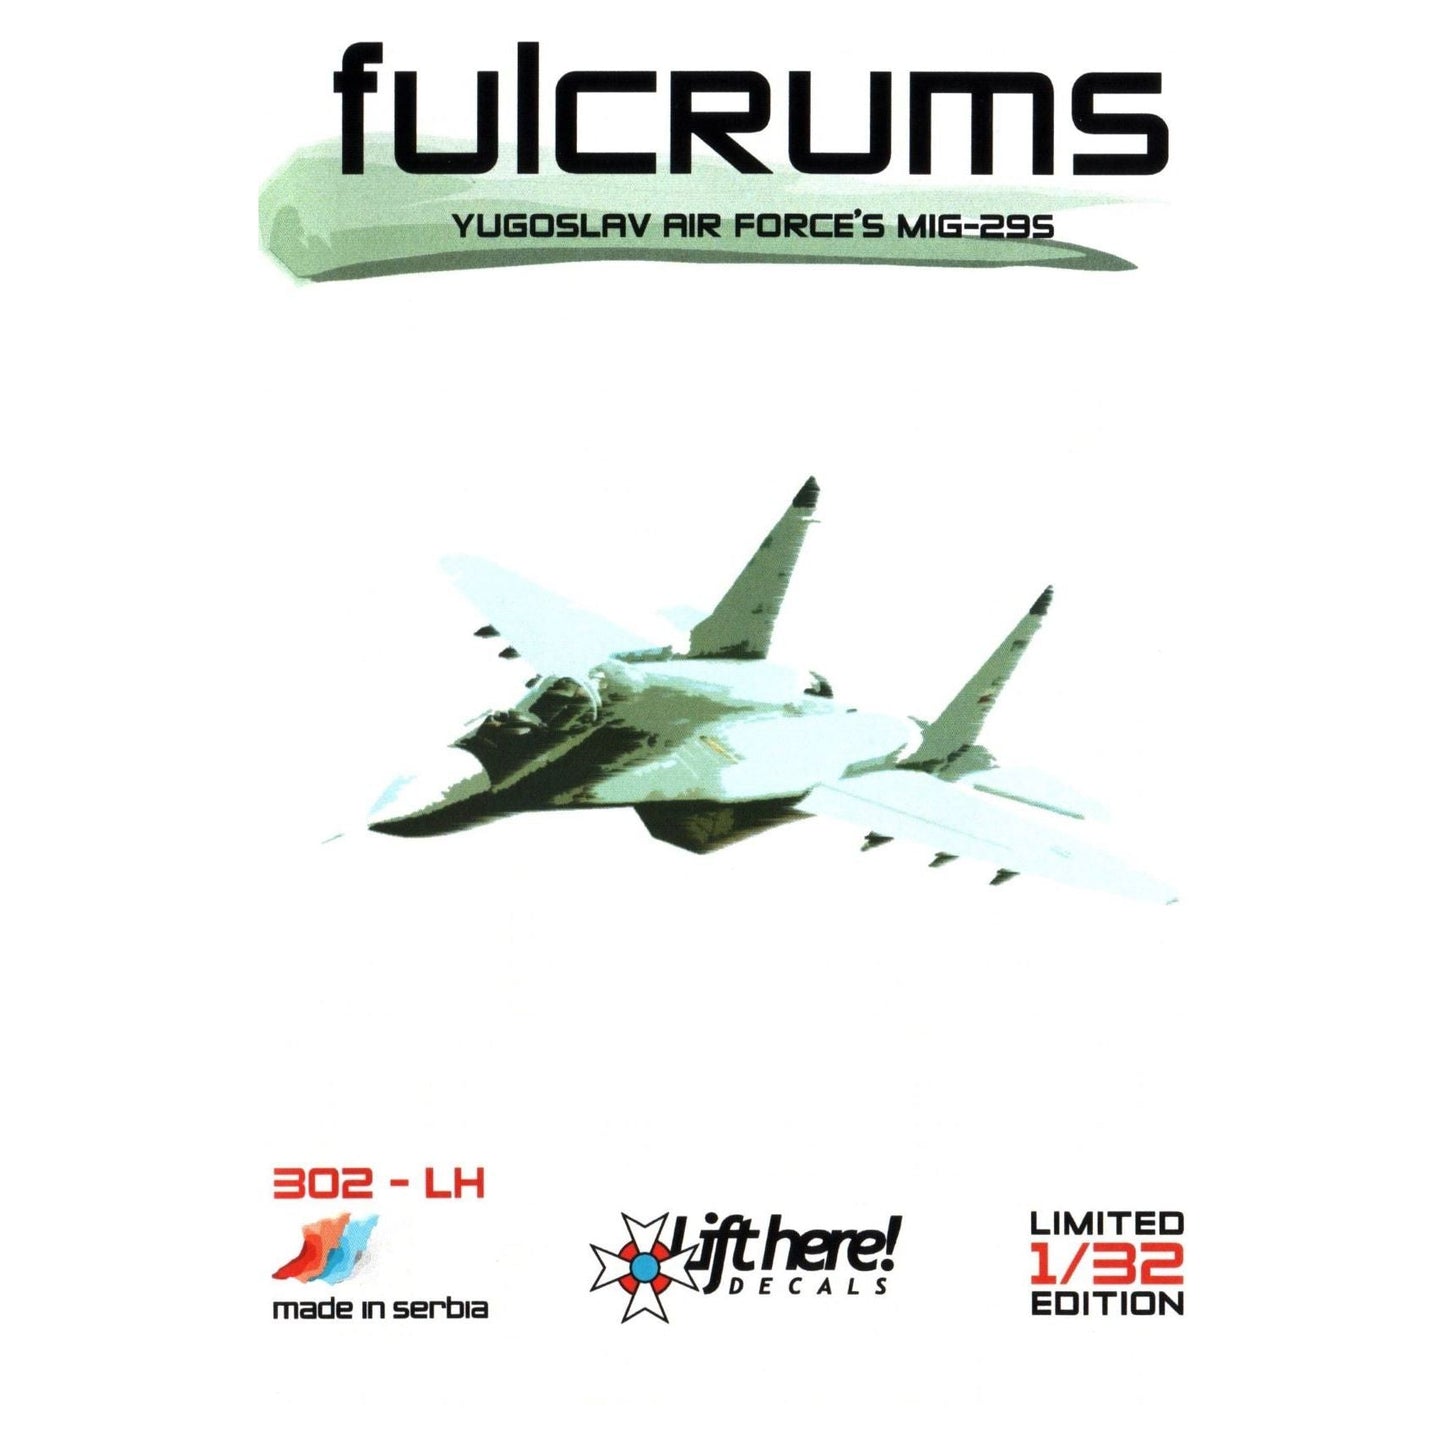 Lift Here [ 302-LH] "Fulcrums", Yugoslav Air Force's MiG-29s, 1/32